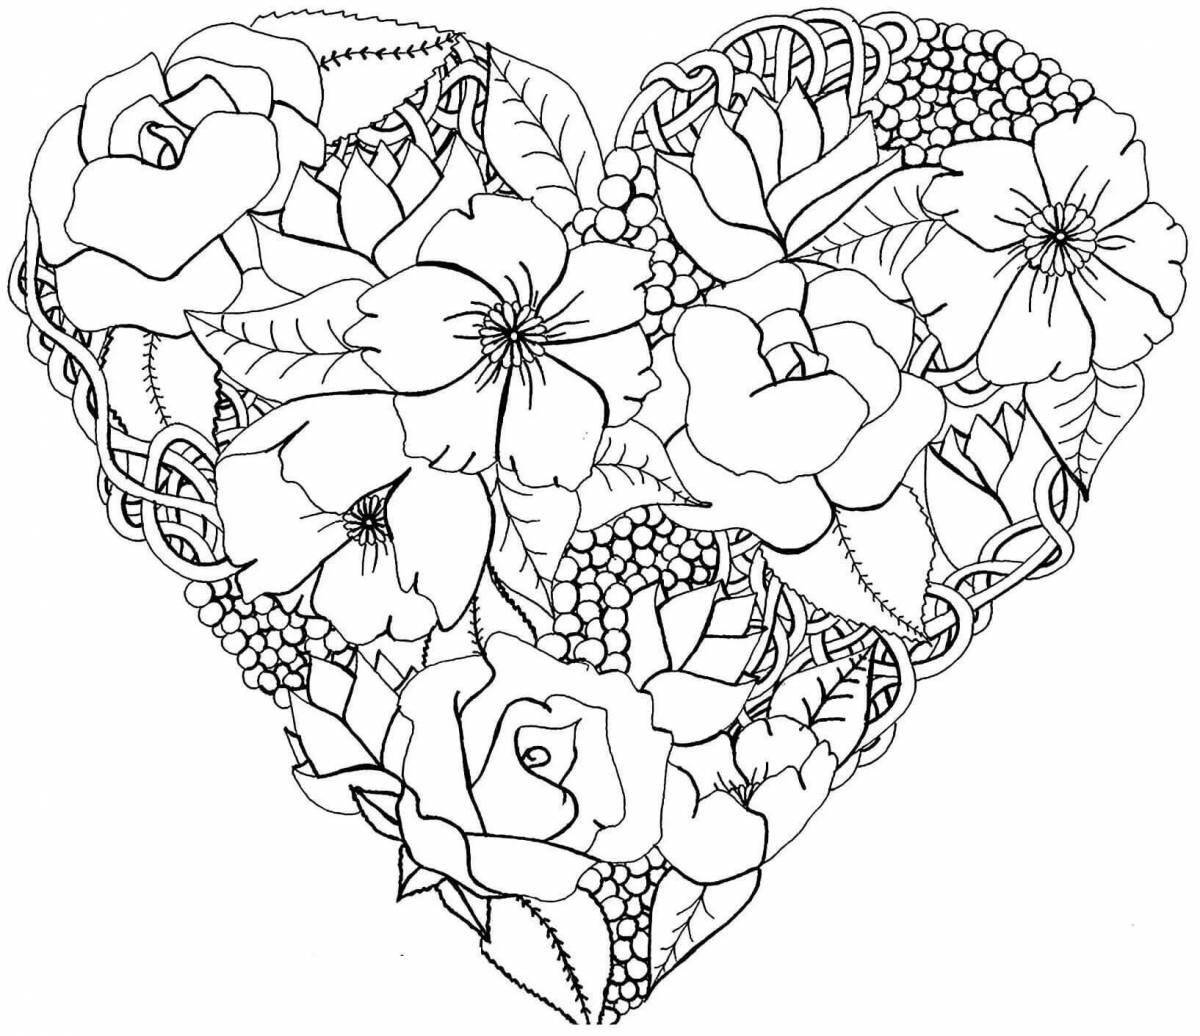 Fun intricate heart coloring page